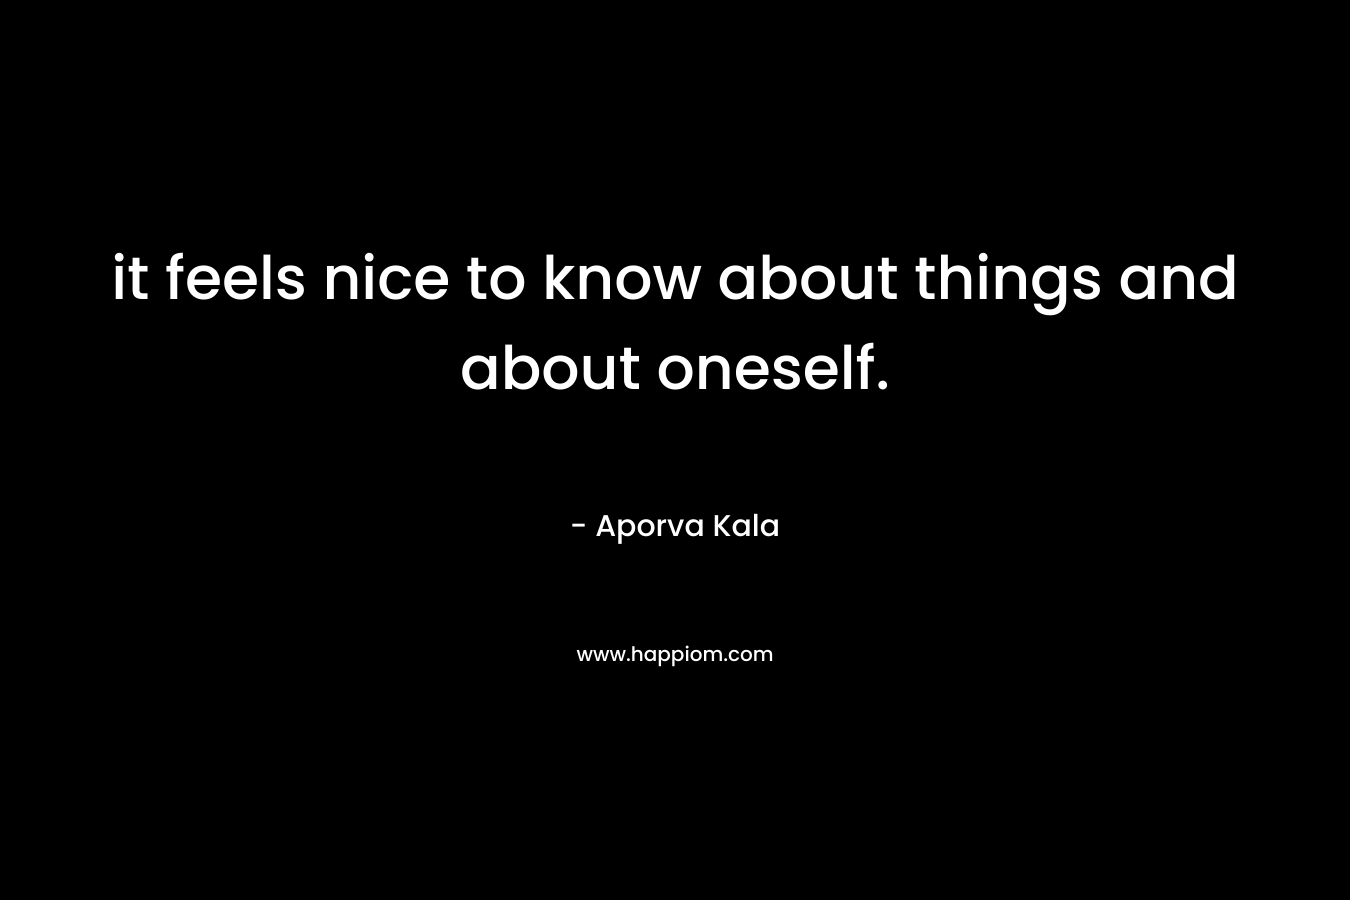 it feels nice to know about things and about oneself.